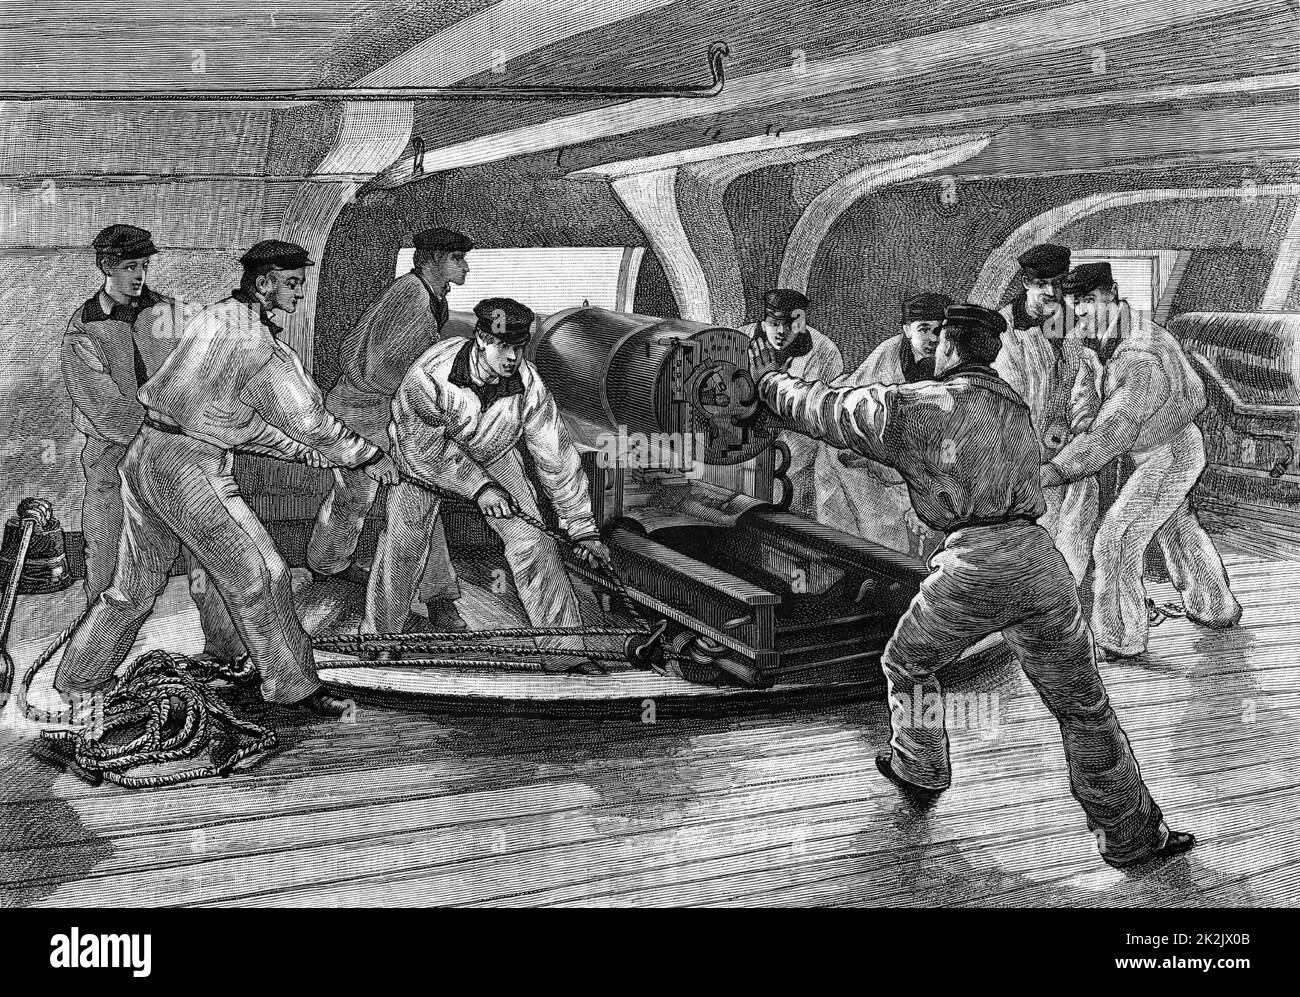 Cadets at the Ecole Navale, the French Naval Academy practicing handling naval cannon below decks of a warship. From 'Le Journal de la Jeunesse' (Paris, c1870). Engraving. Stock Photo